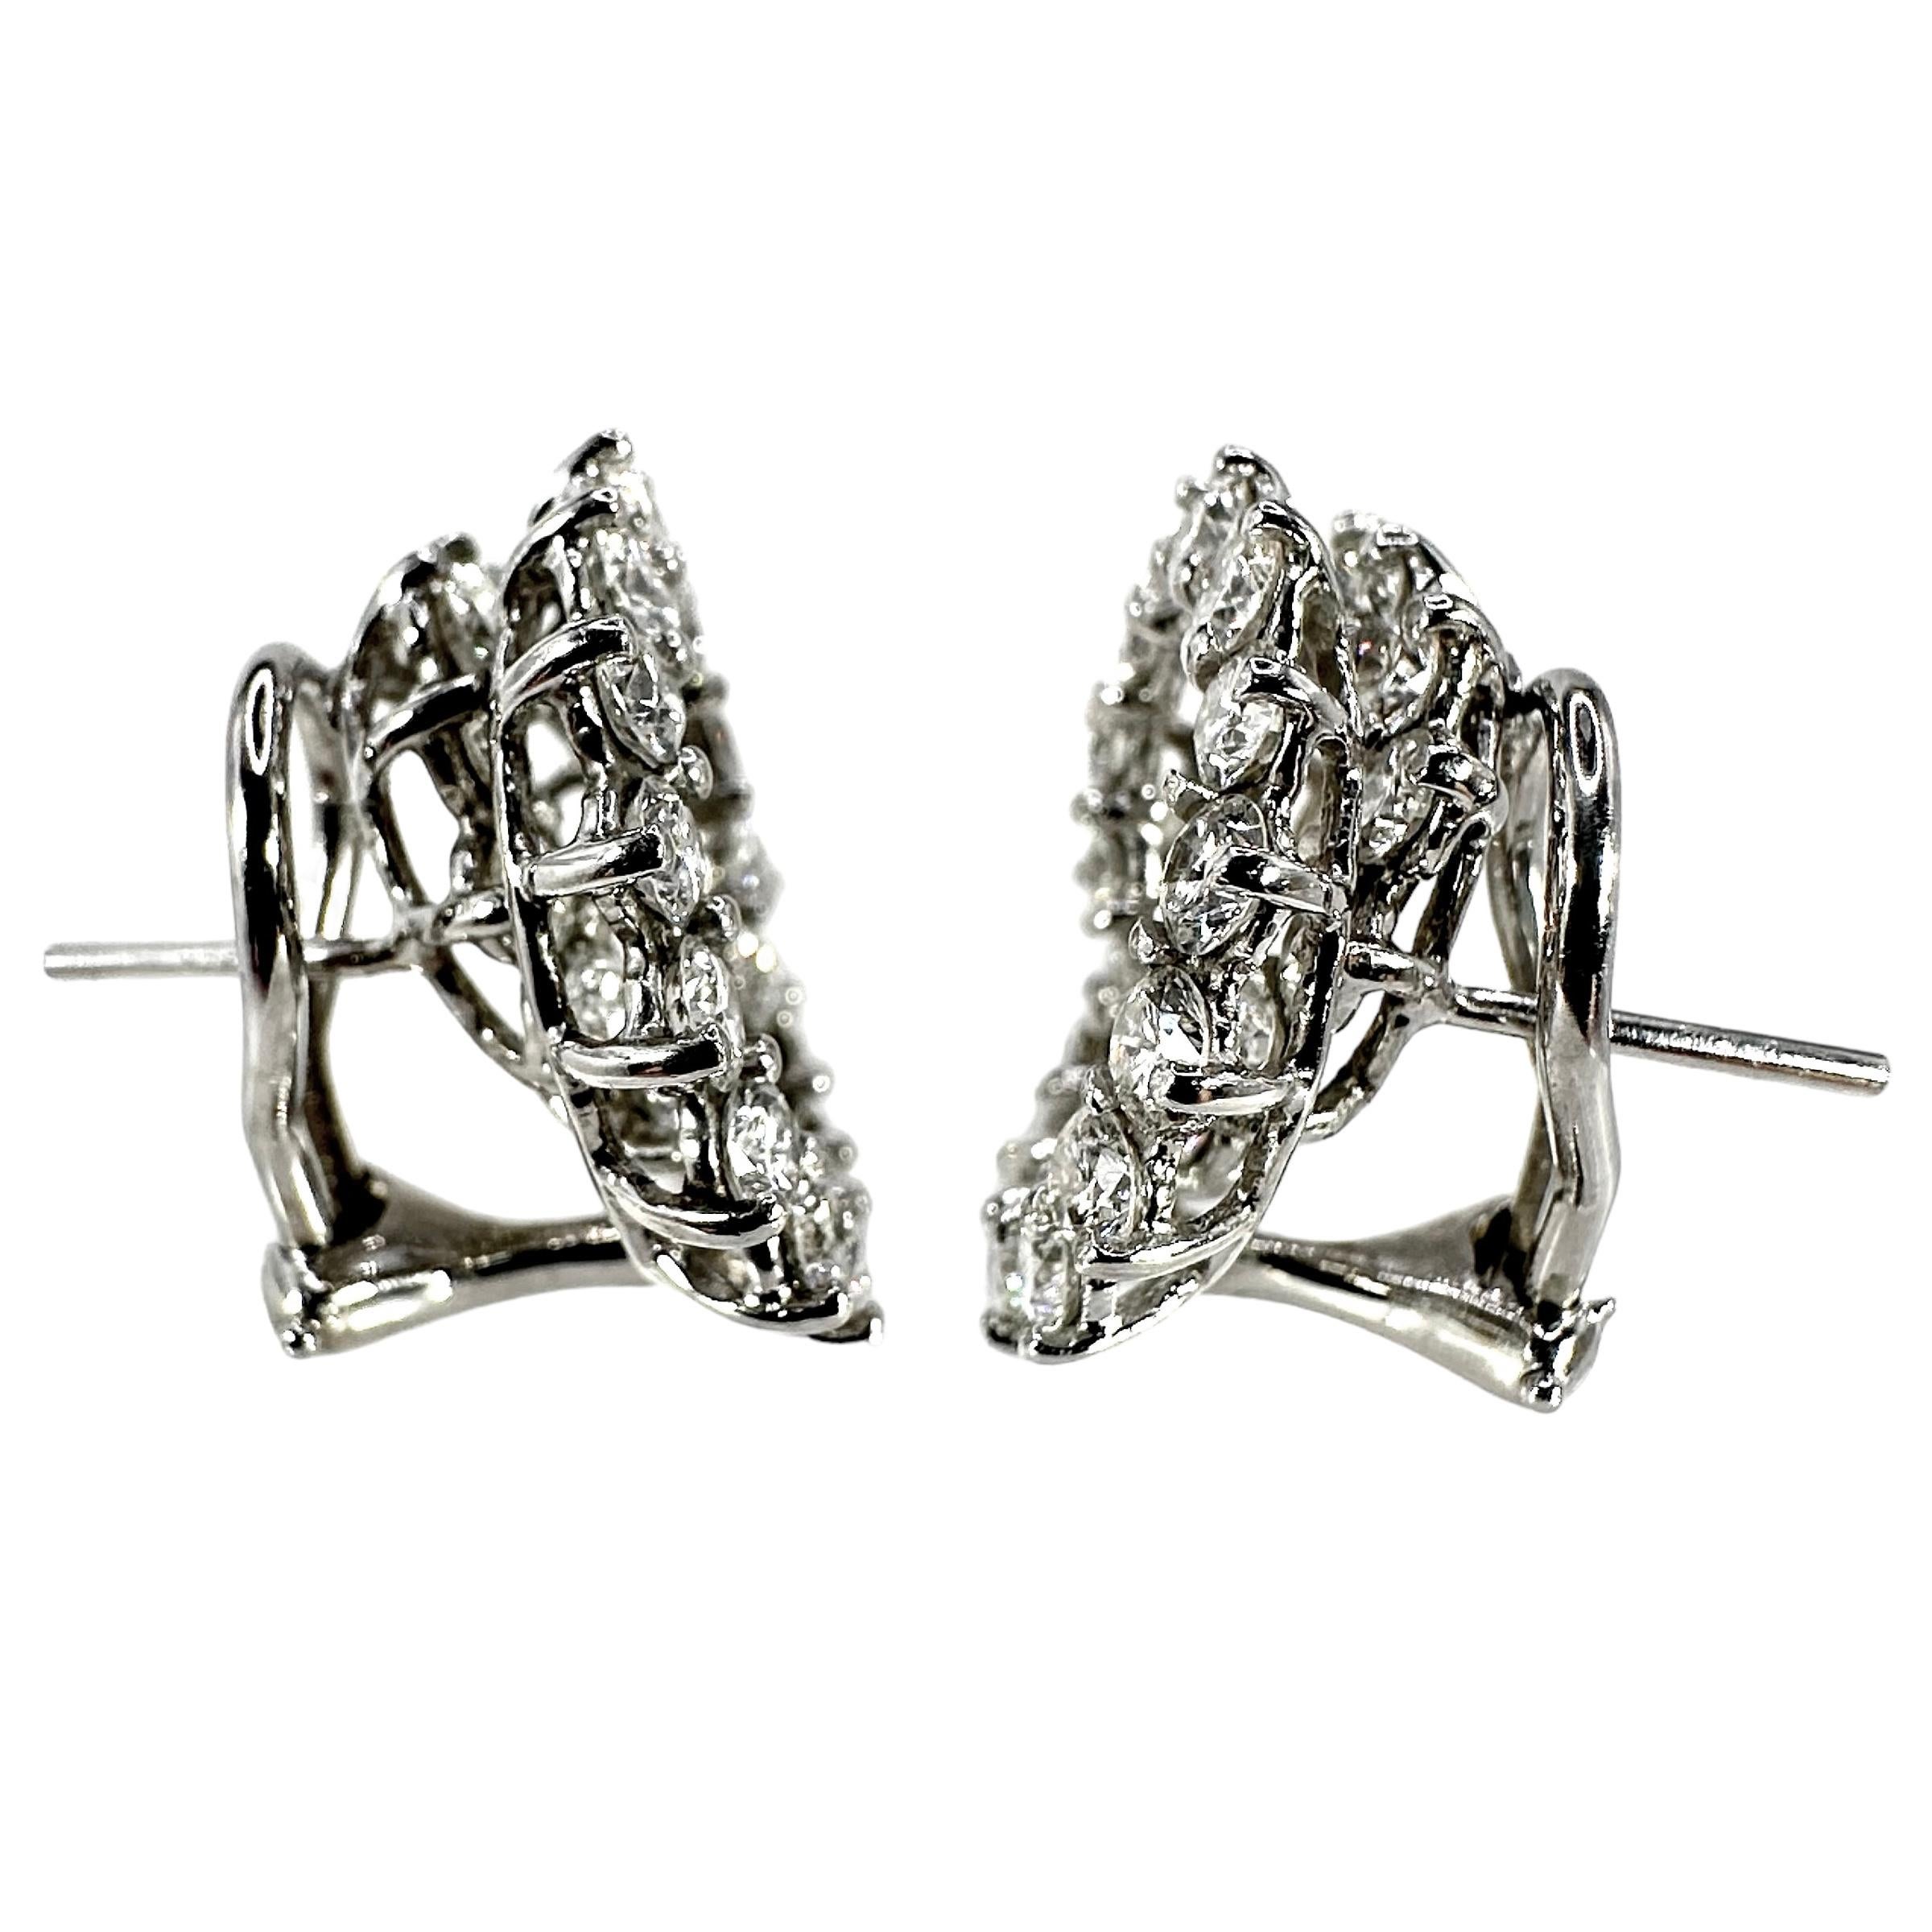 This  iconic vintage pair of platinum and diamond earrings were conceived by noted jewelry designer Angela Cummings, on behalf of Tiffany and Company. The exciting design is now retired but their ingenious style will always create a true sense of